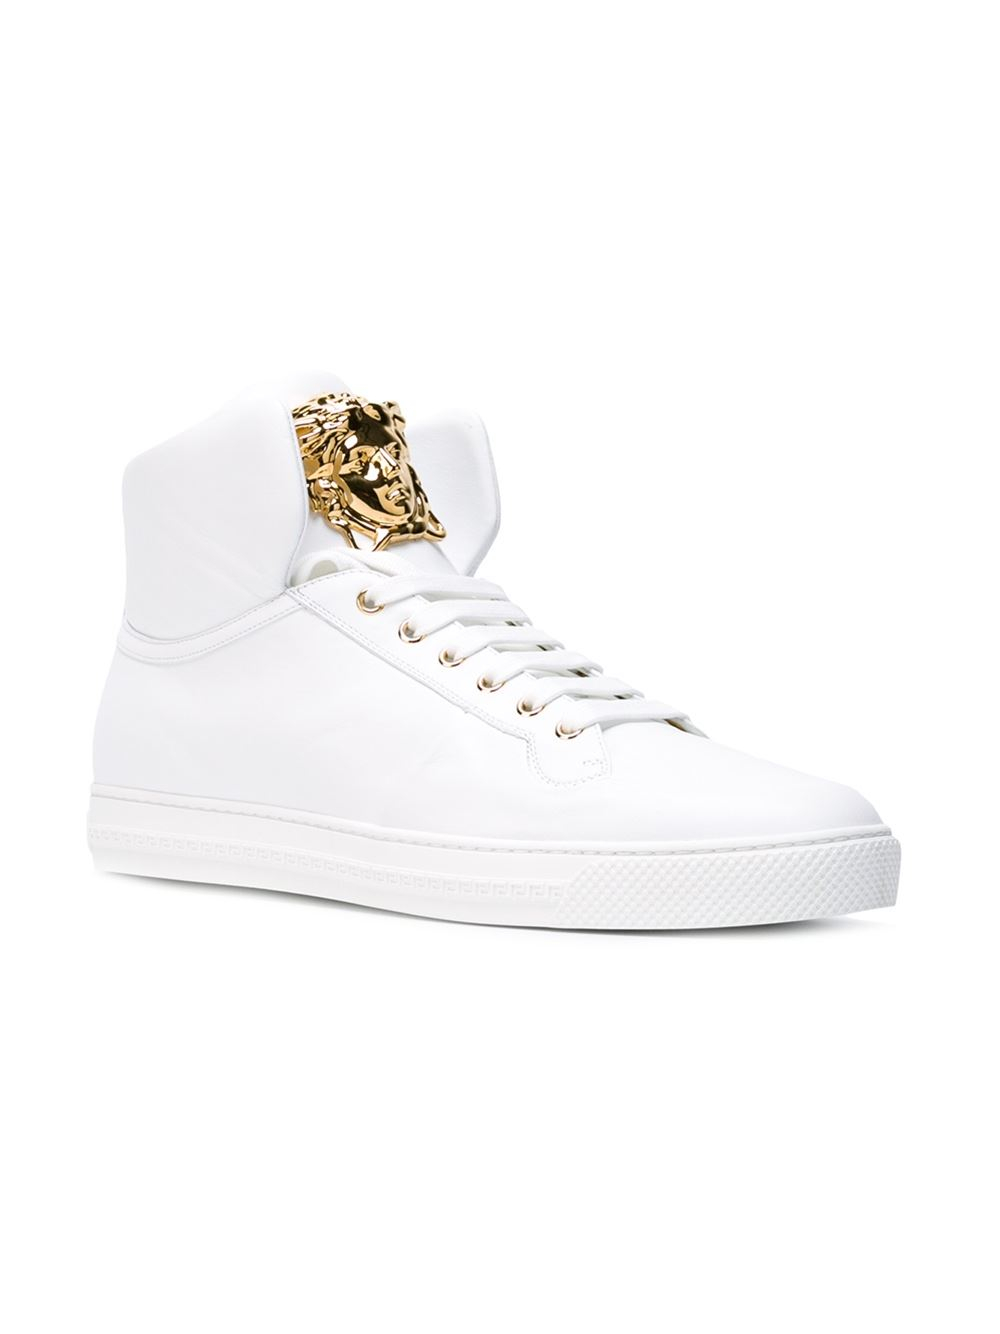 Versace Medusa HiTop Sneakers in White for Men Save 31